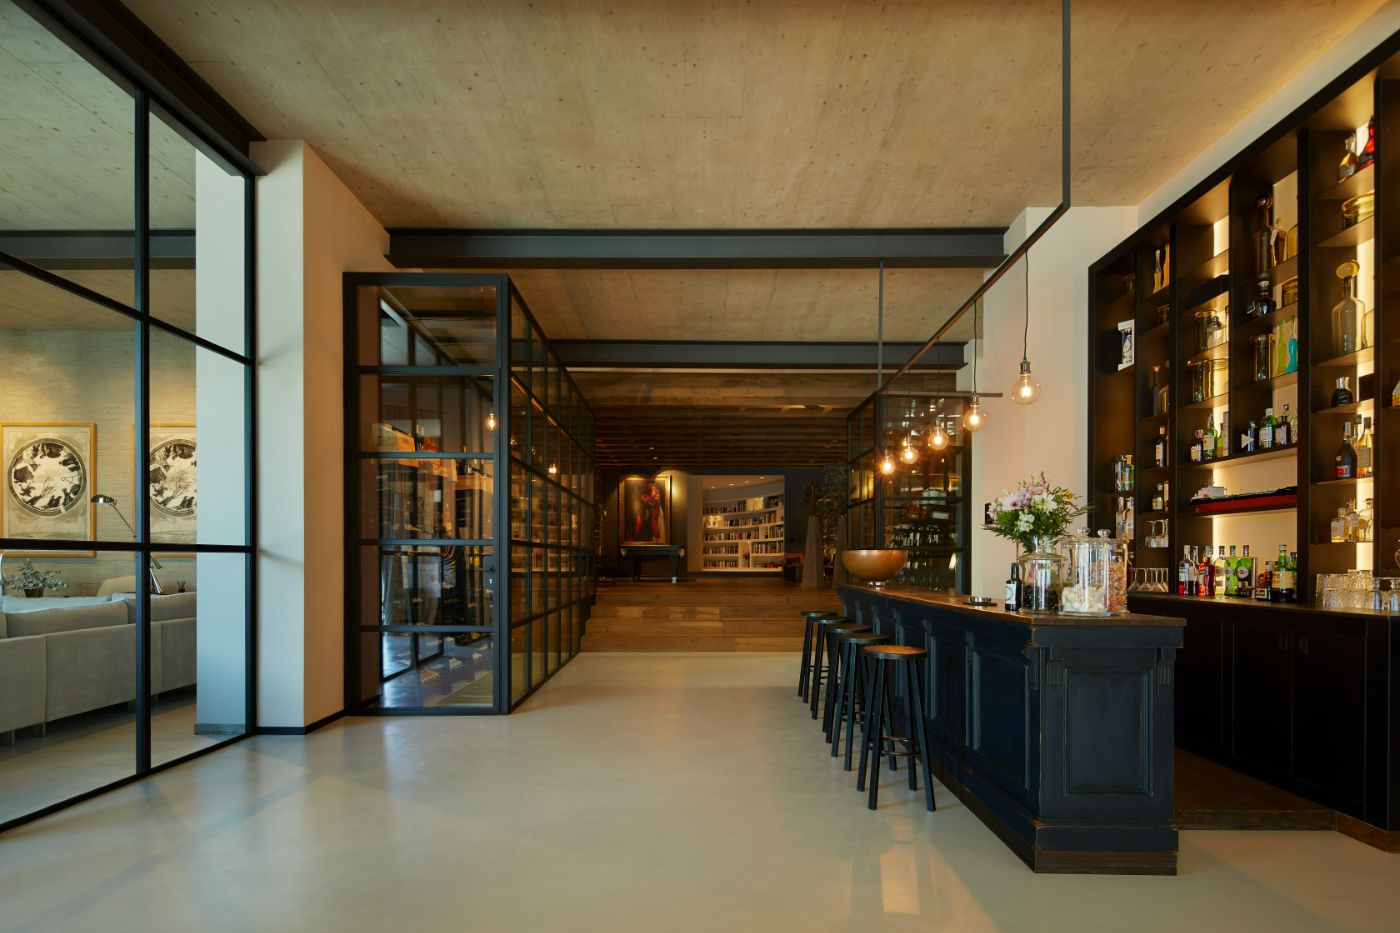 An interior shot including the bar at the Breakwater.